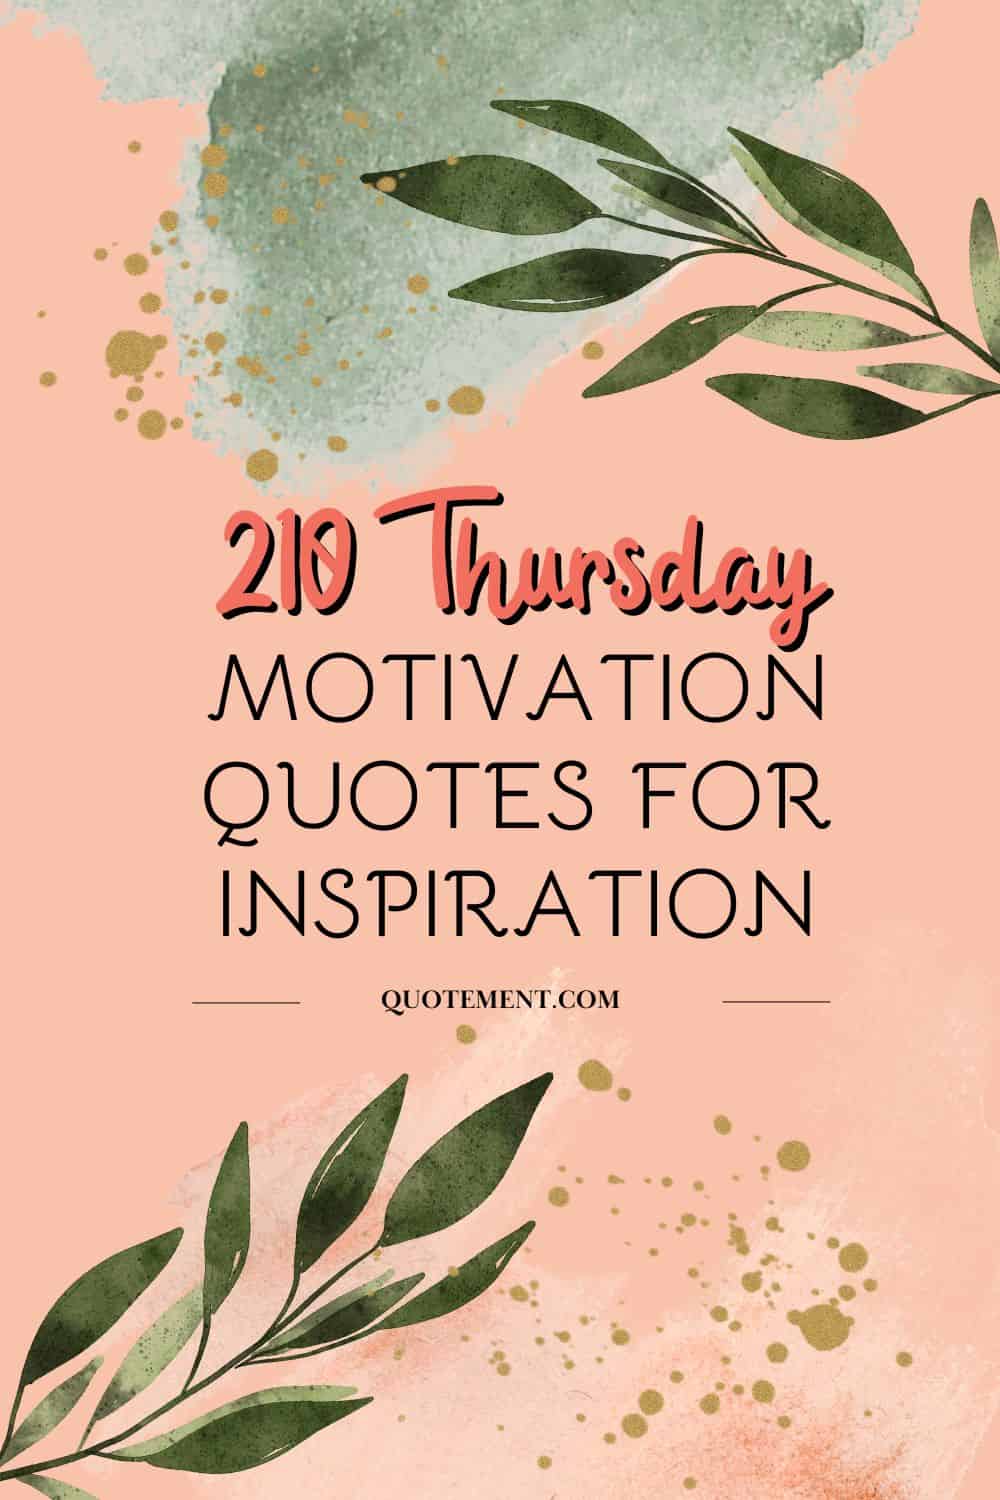 210 Ultimate Thursday Motivation Quotes To Conquer The Day
